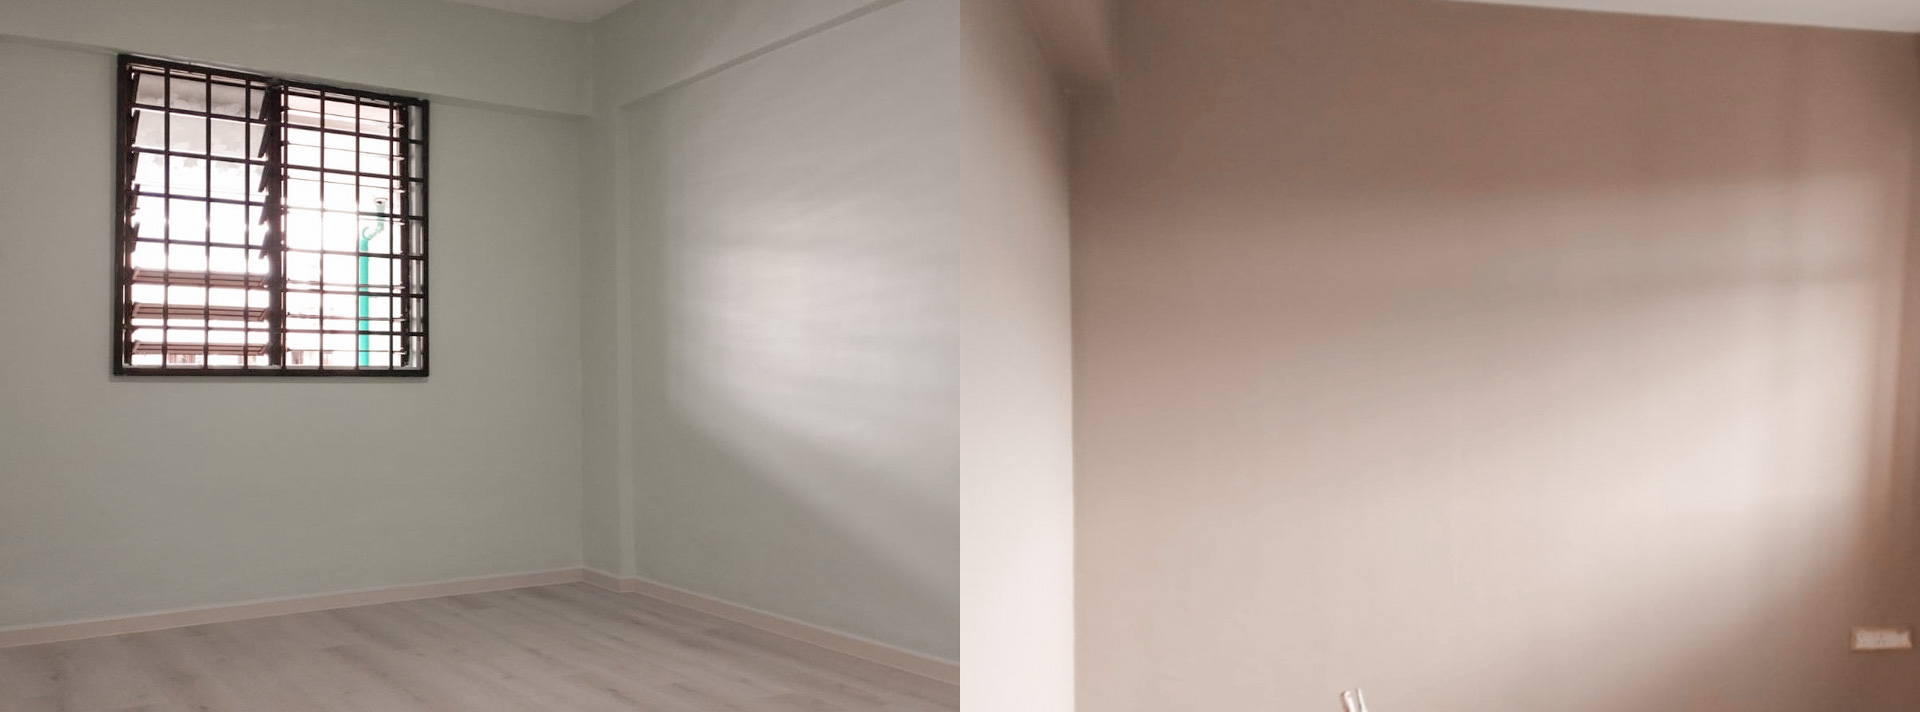 https://www.easycleansg.com/pages/painting-services